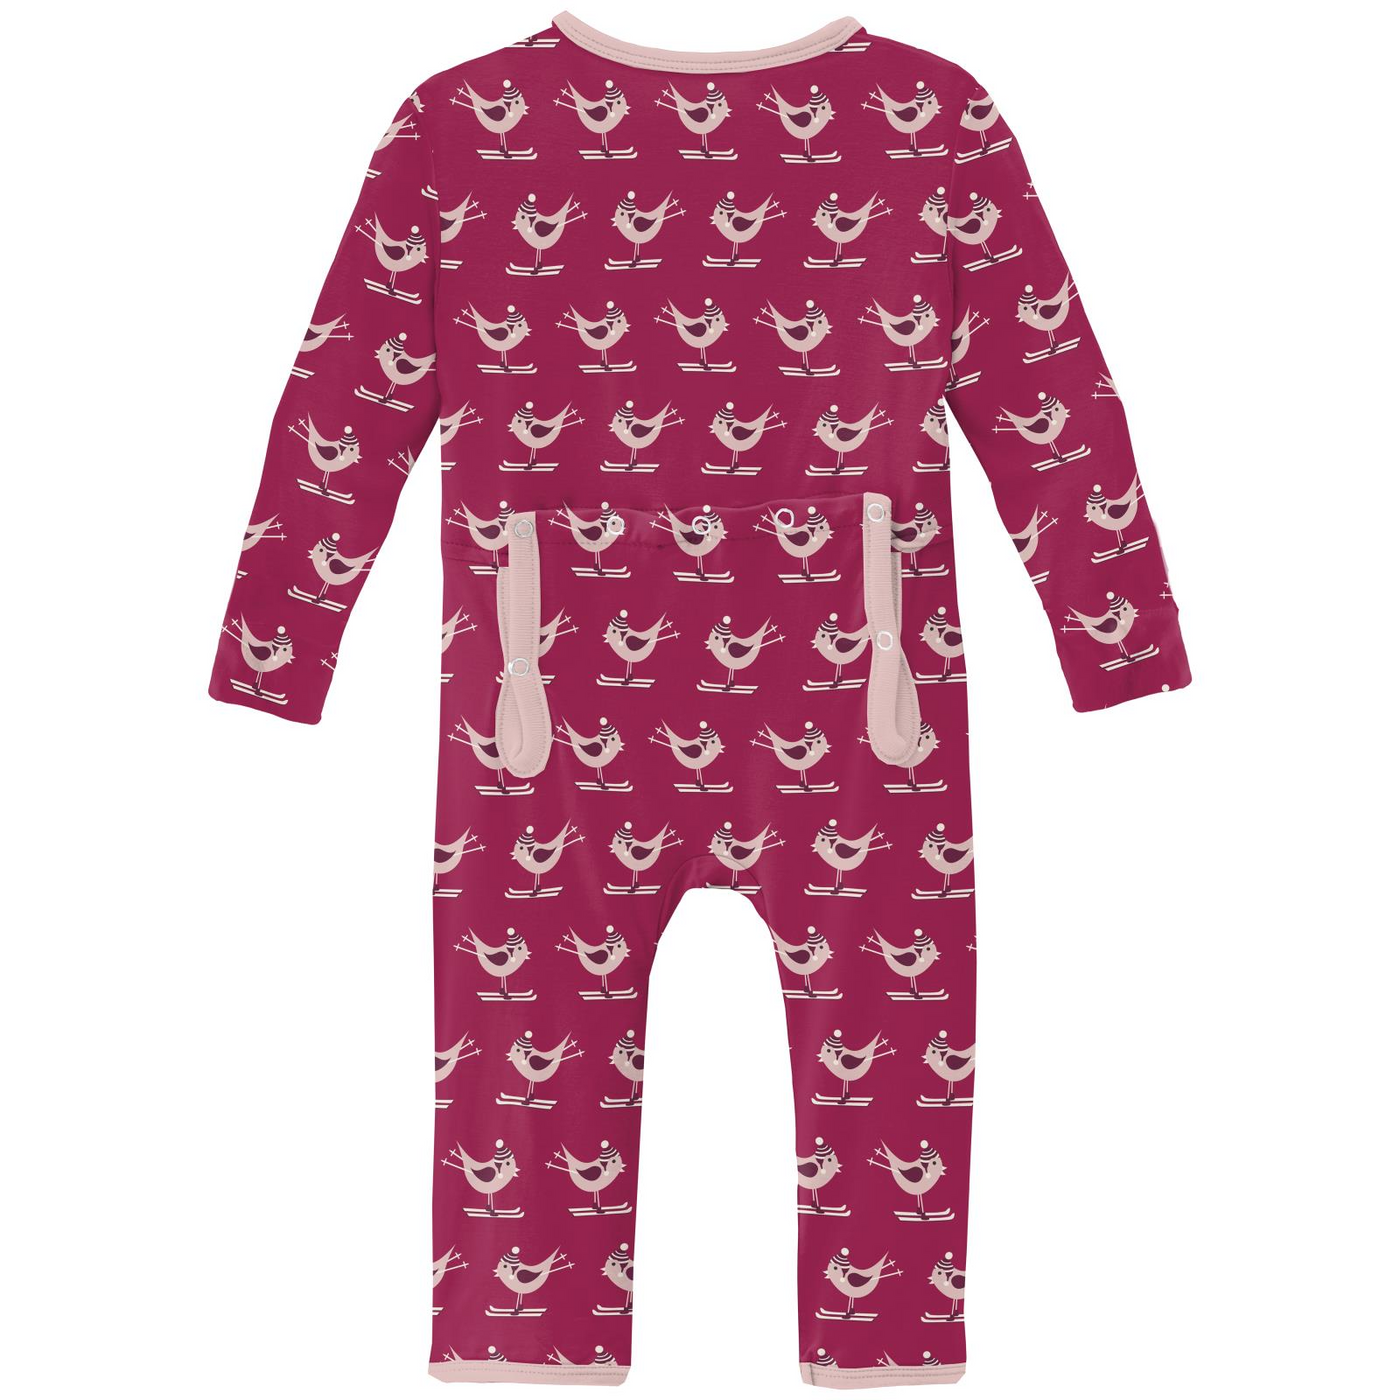 Kickee Pants Coverall with 2 Way Zipper: Berry Ski Birds